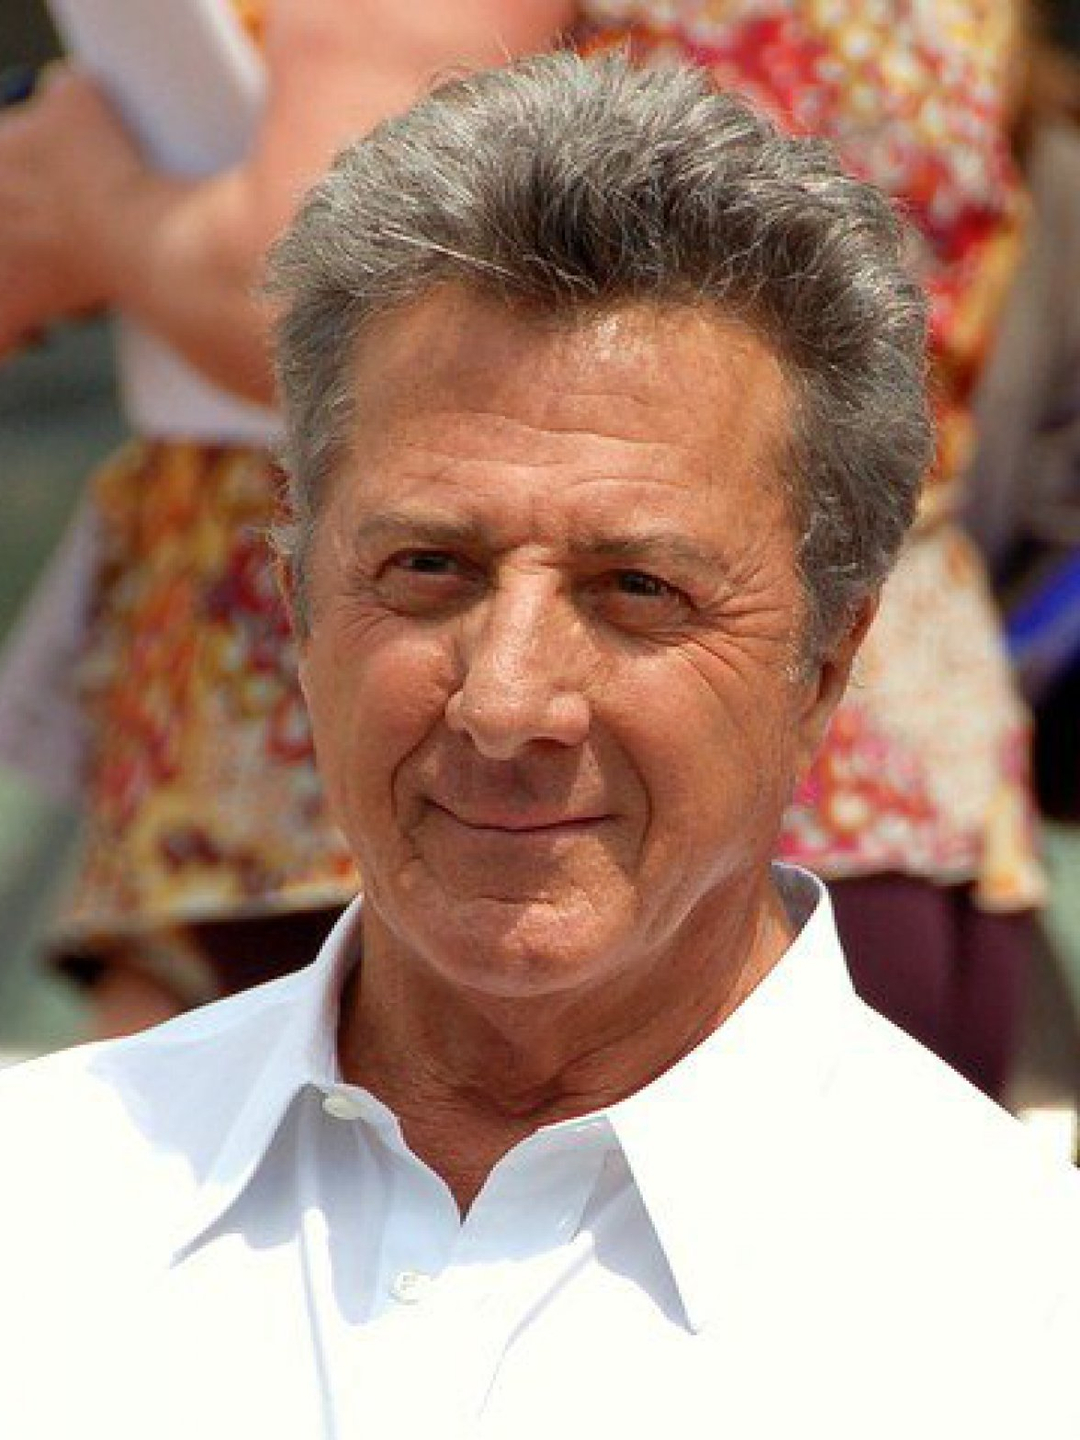 Dustin Hoffman height and weight